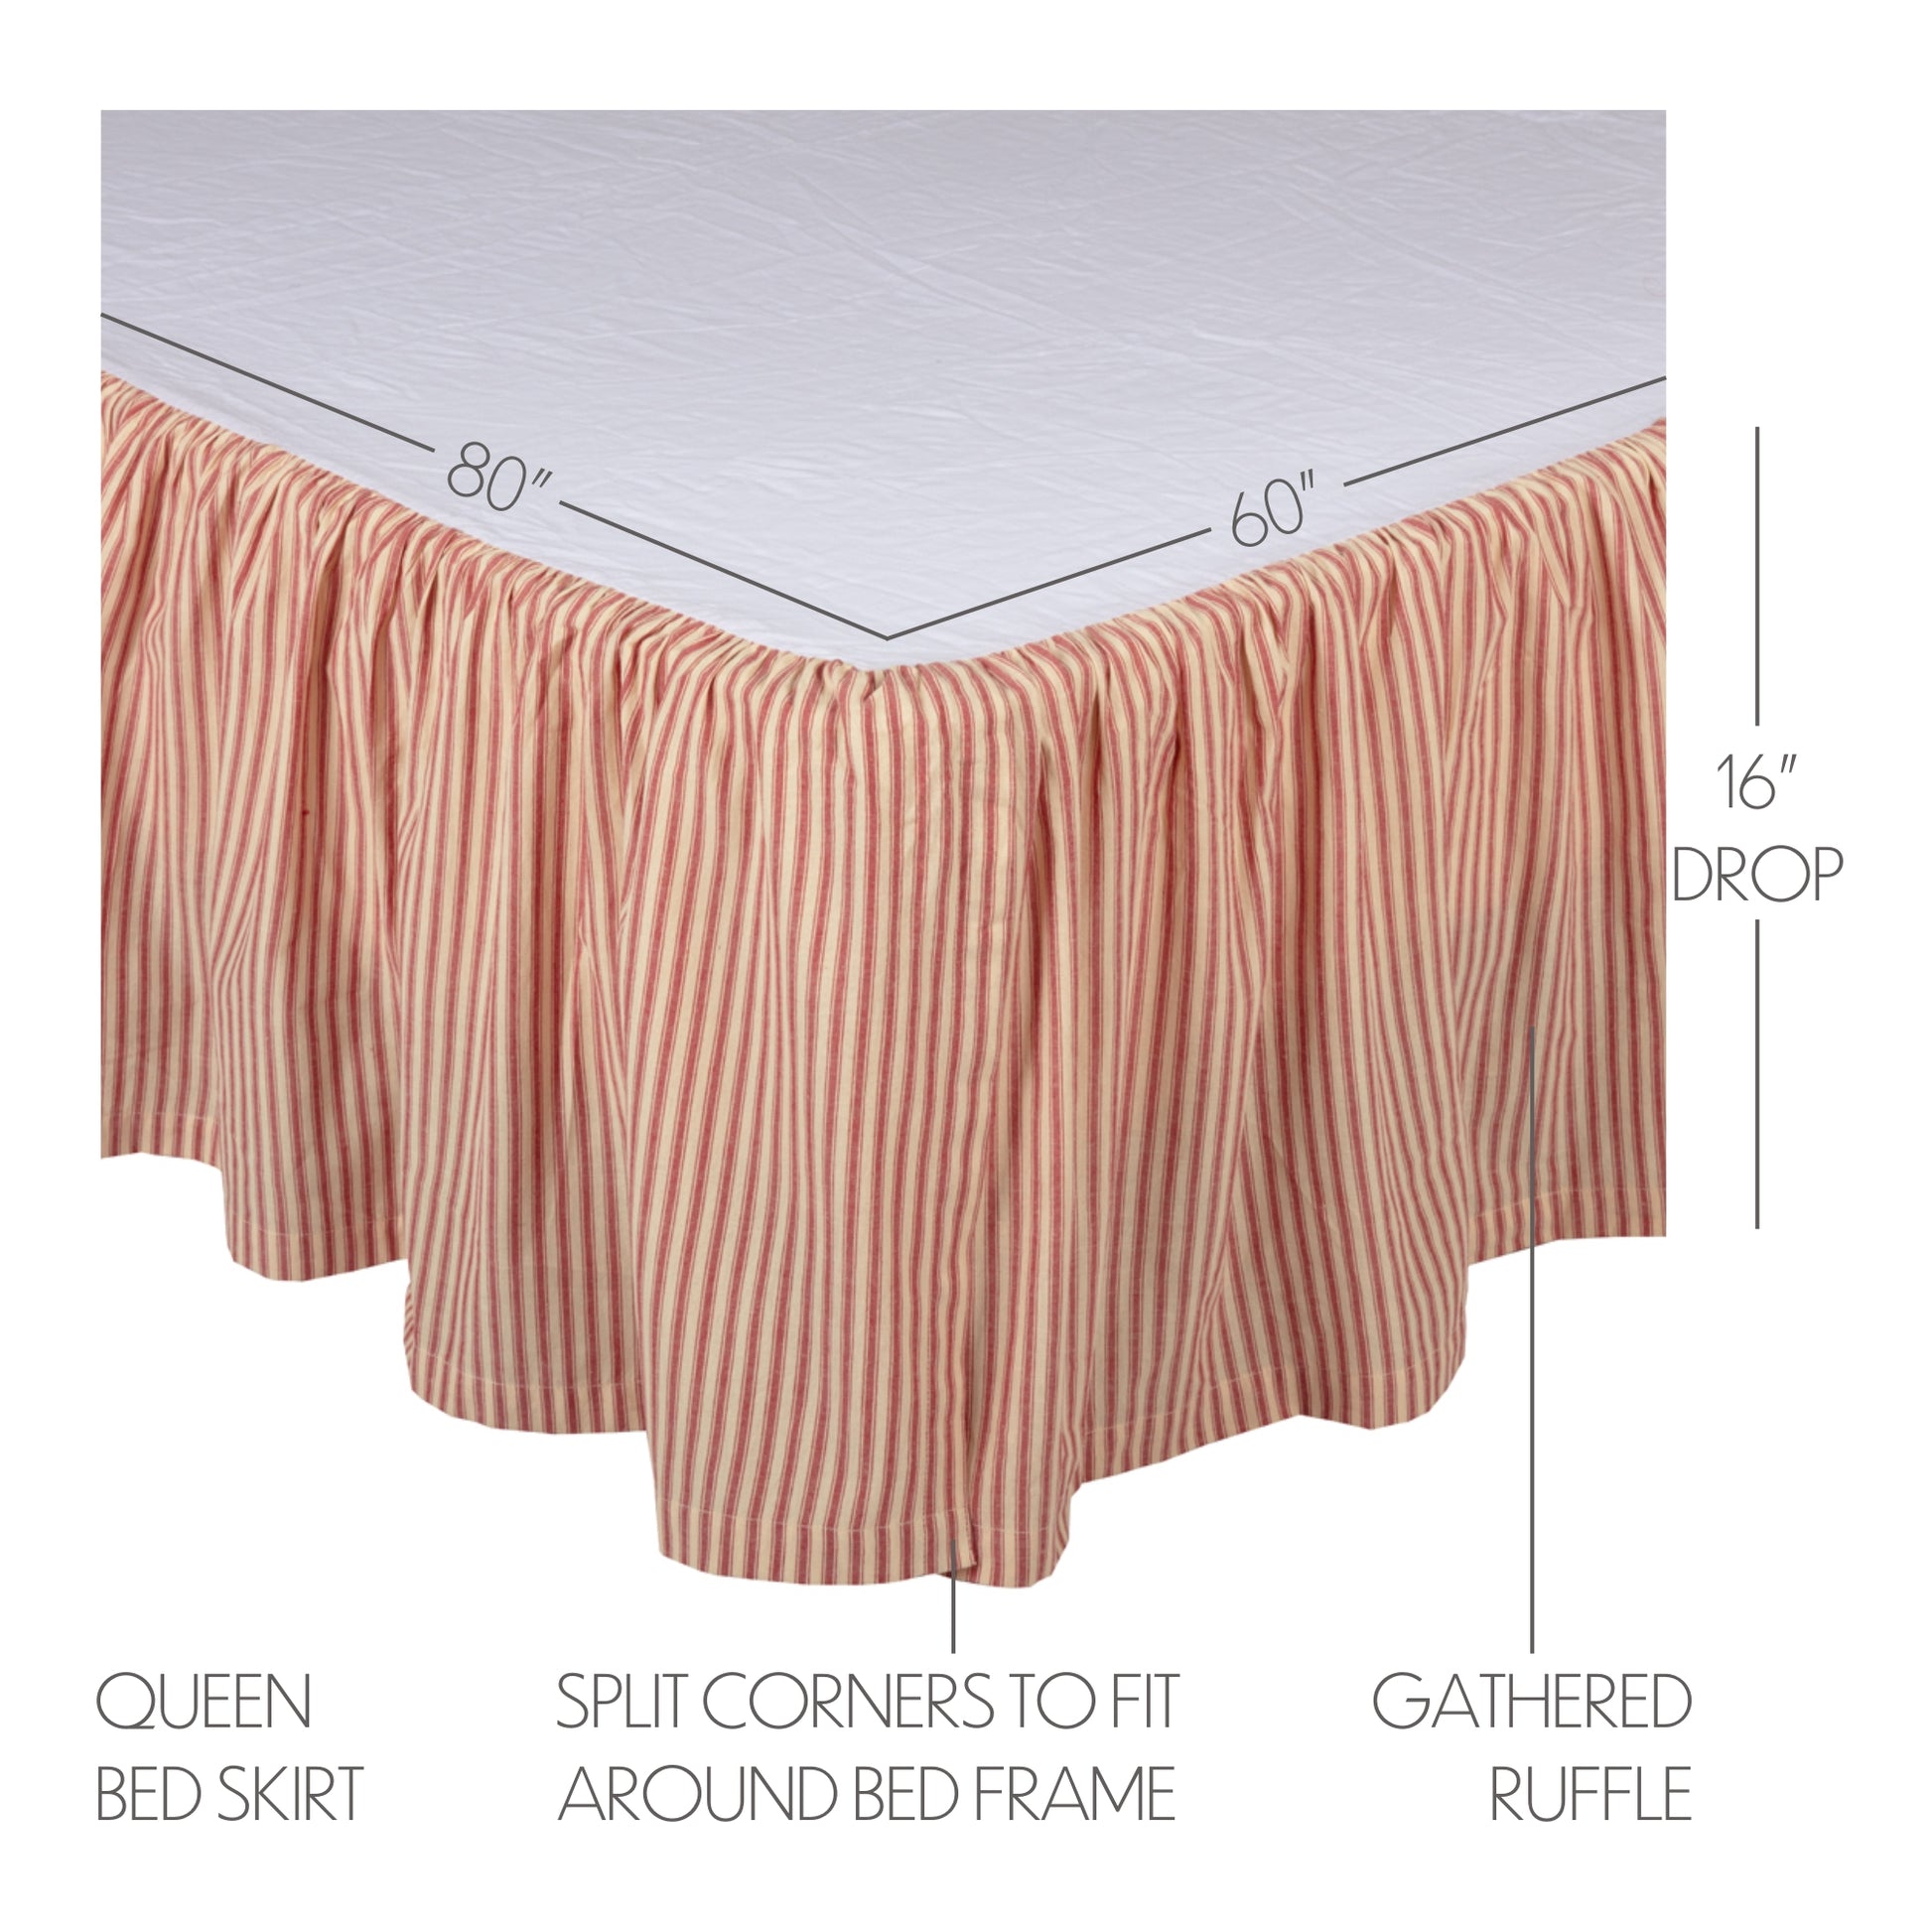 51949-Sawyer-Mill-Red-Ticking-Stripe-Queen-Bed-Skirt-60x80x16-image-1